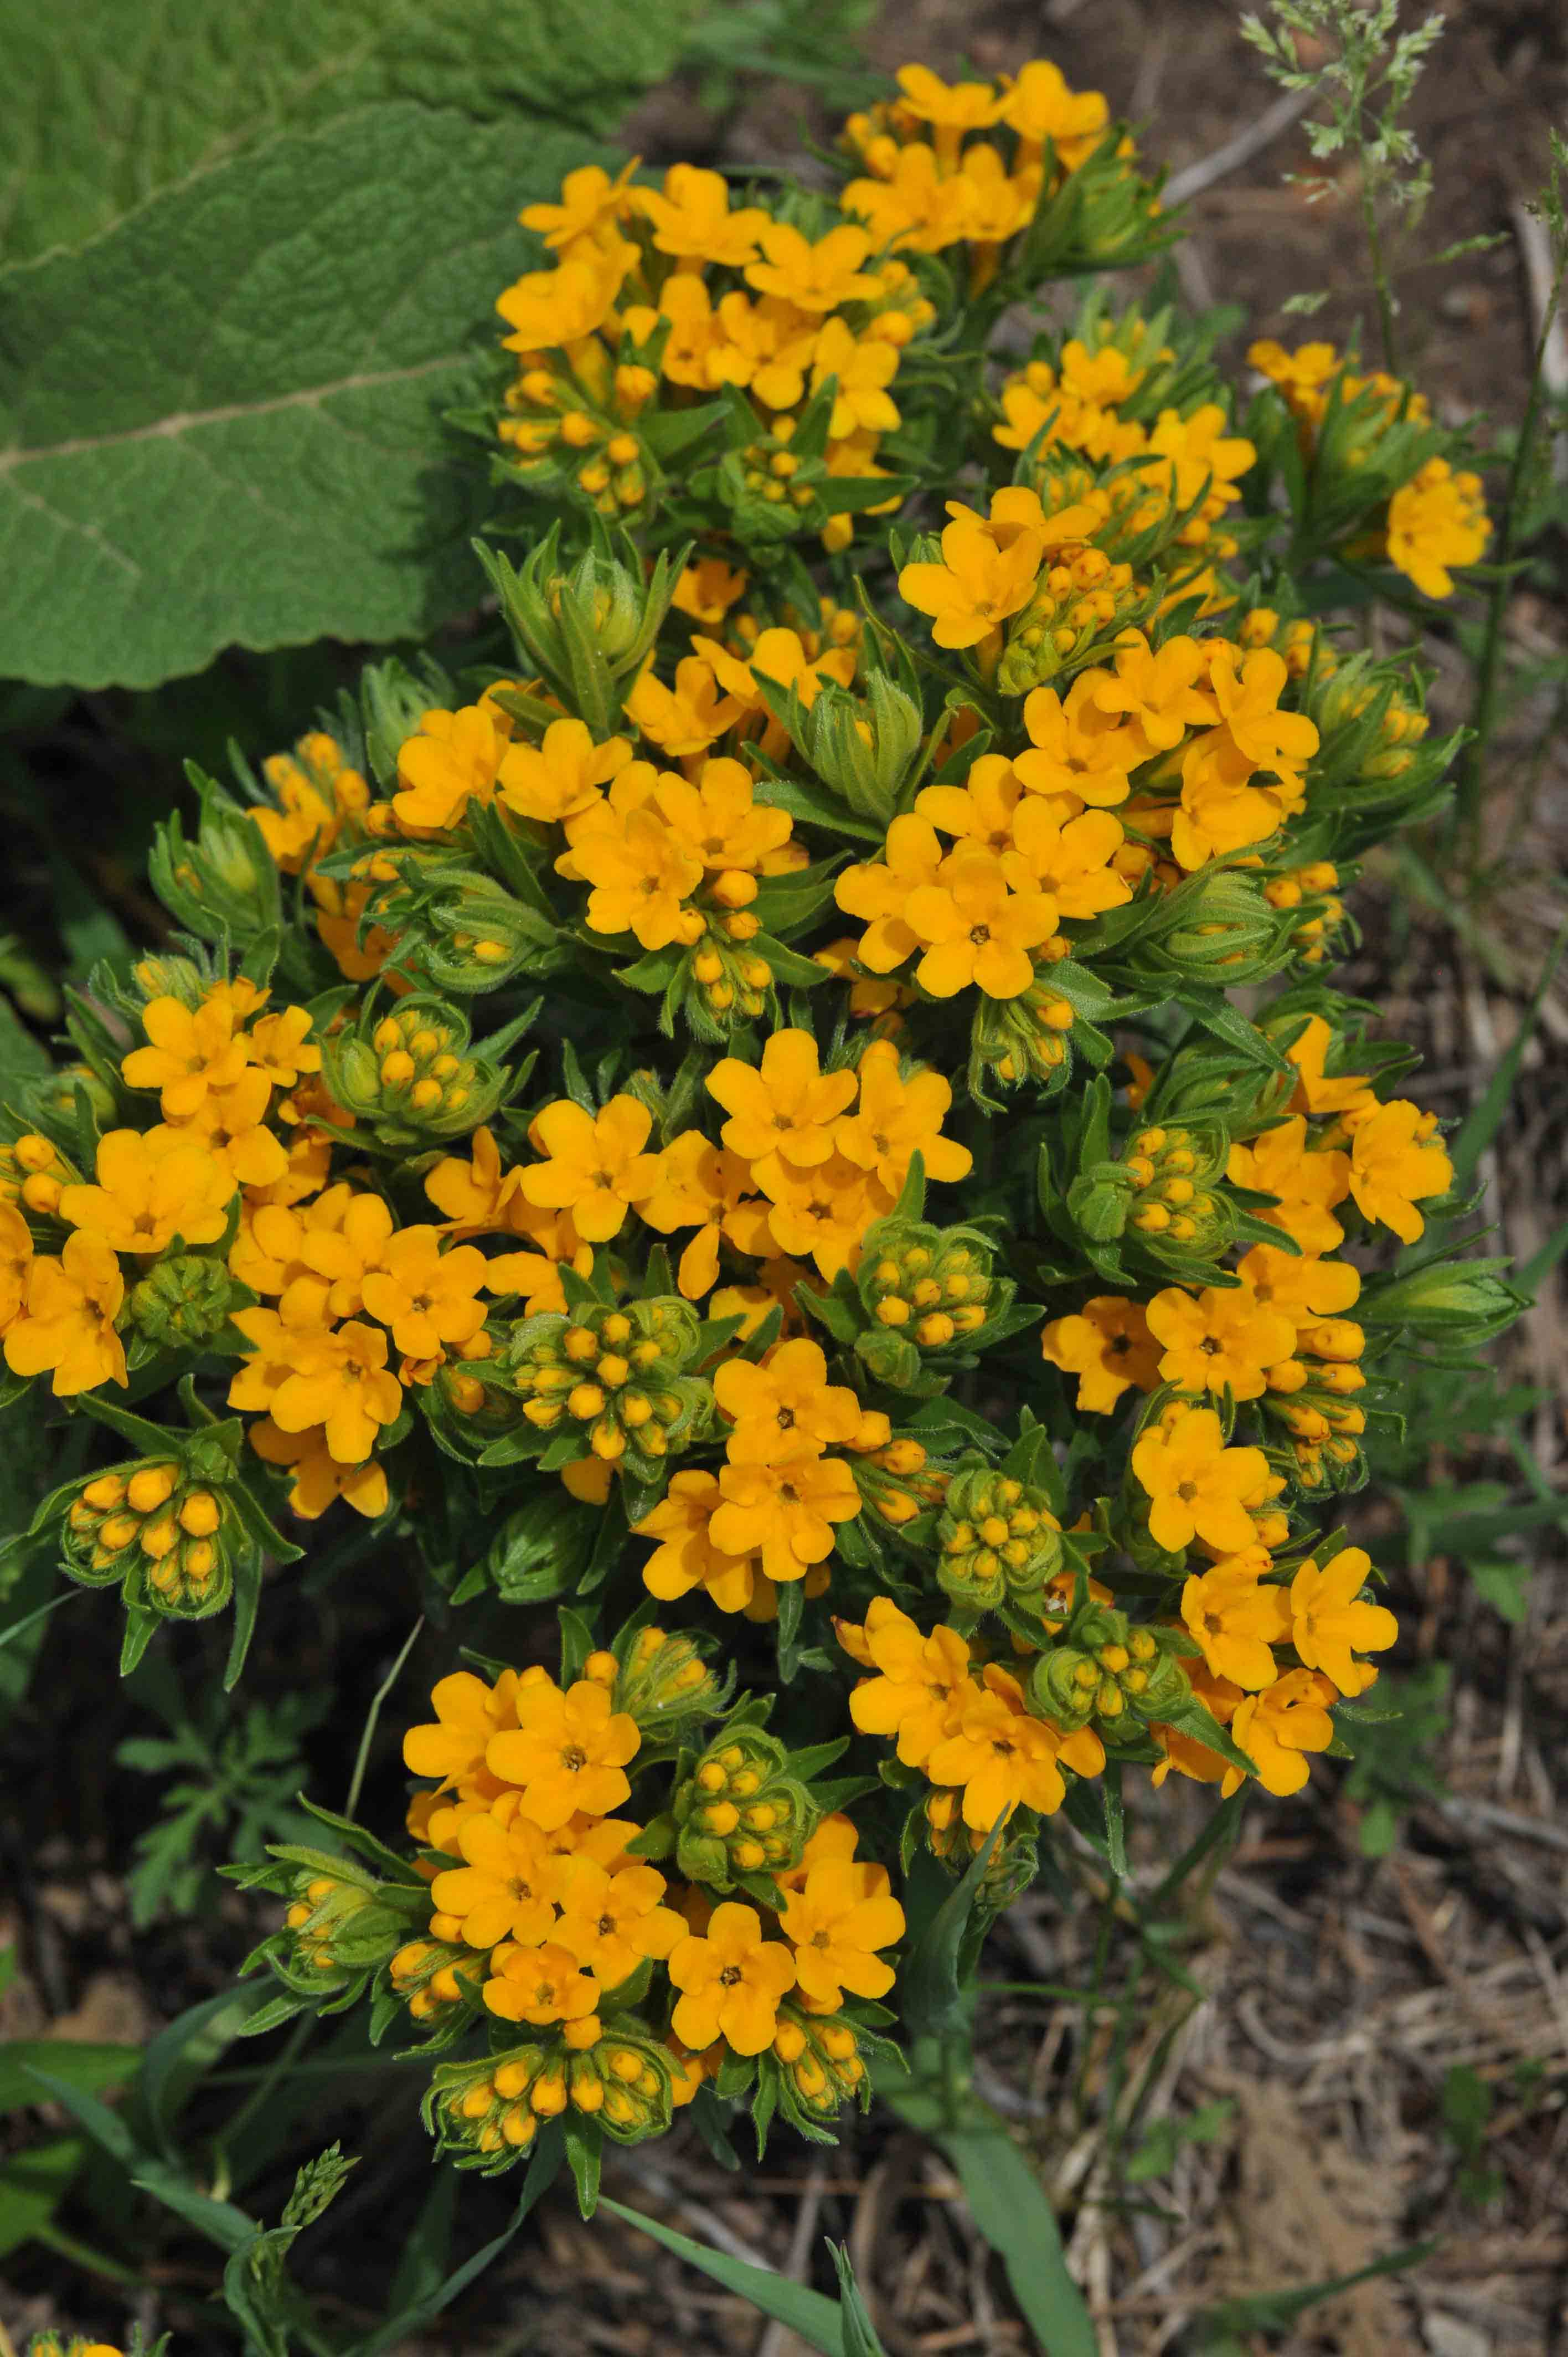 Hairy puccoon